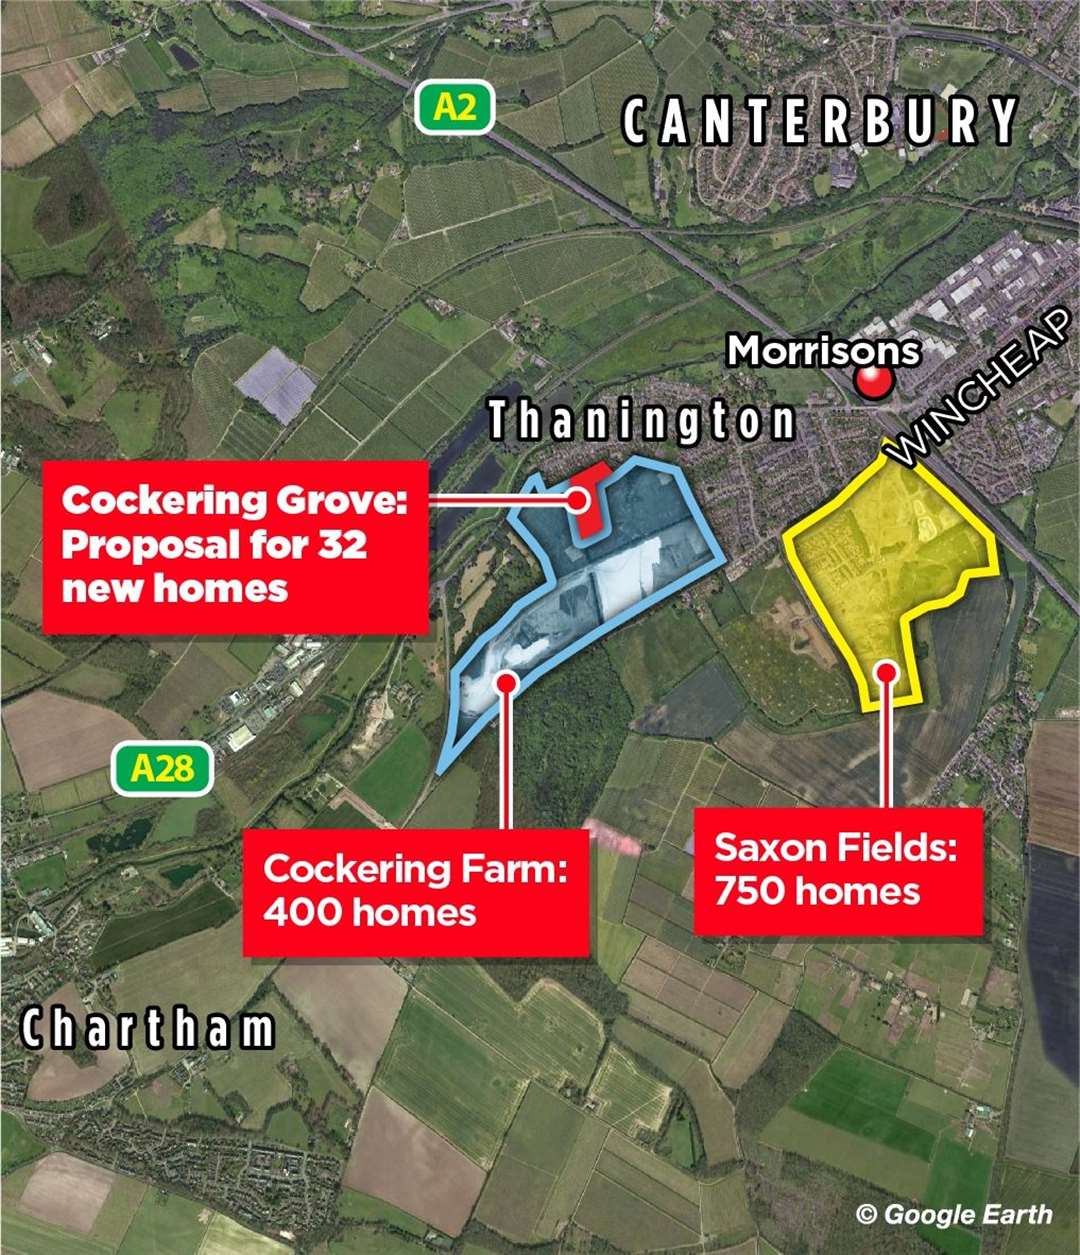 A look at the developments taking over Thanington